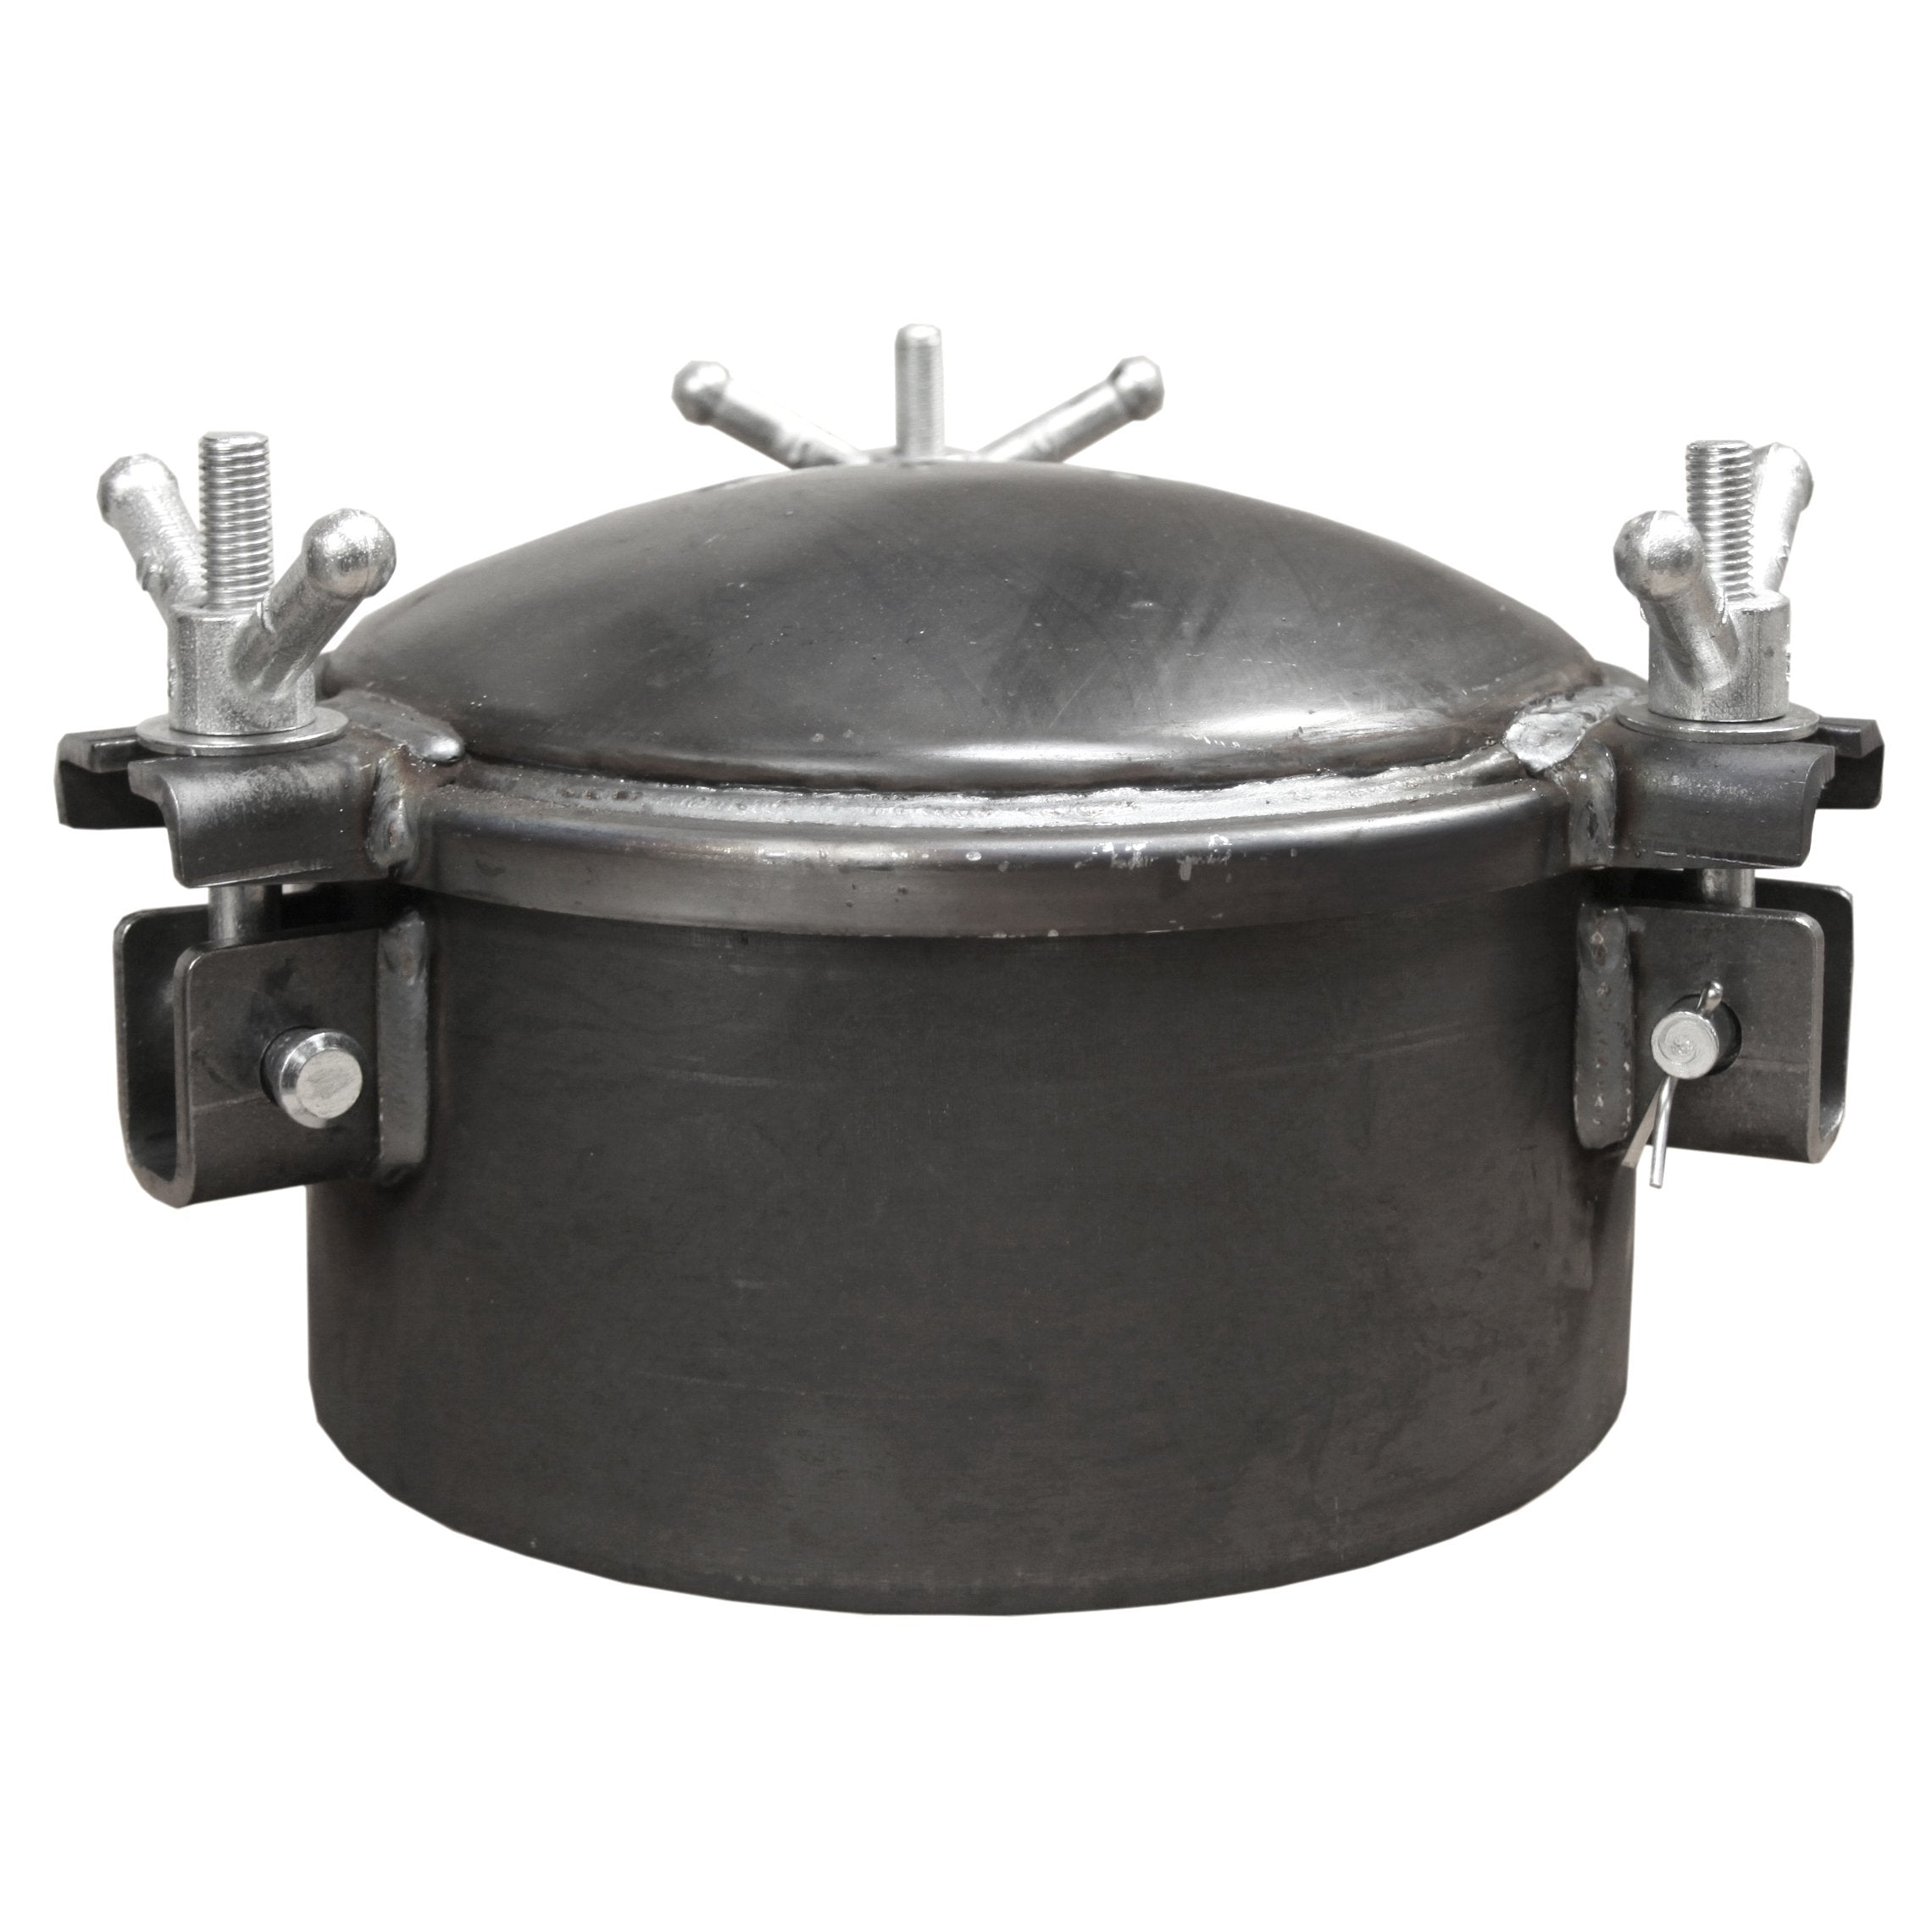 12" Hatch, gasket-in-lid design, 6" neck with 3 wing nut lid.  Features:  A36 Carbon Steel Lid, Gasket in Lid Robotically Welded Weldable 1/4" A36 Carbon Steel Base 3 Standard Wing Nut Assemblies Made in the USA 5/8" Buna Gasket Weight: 40 lbs.